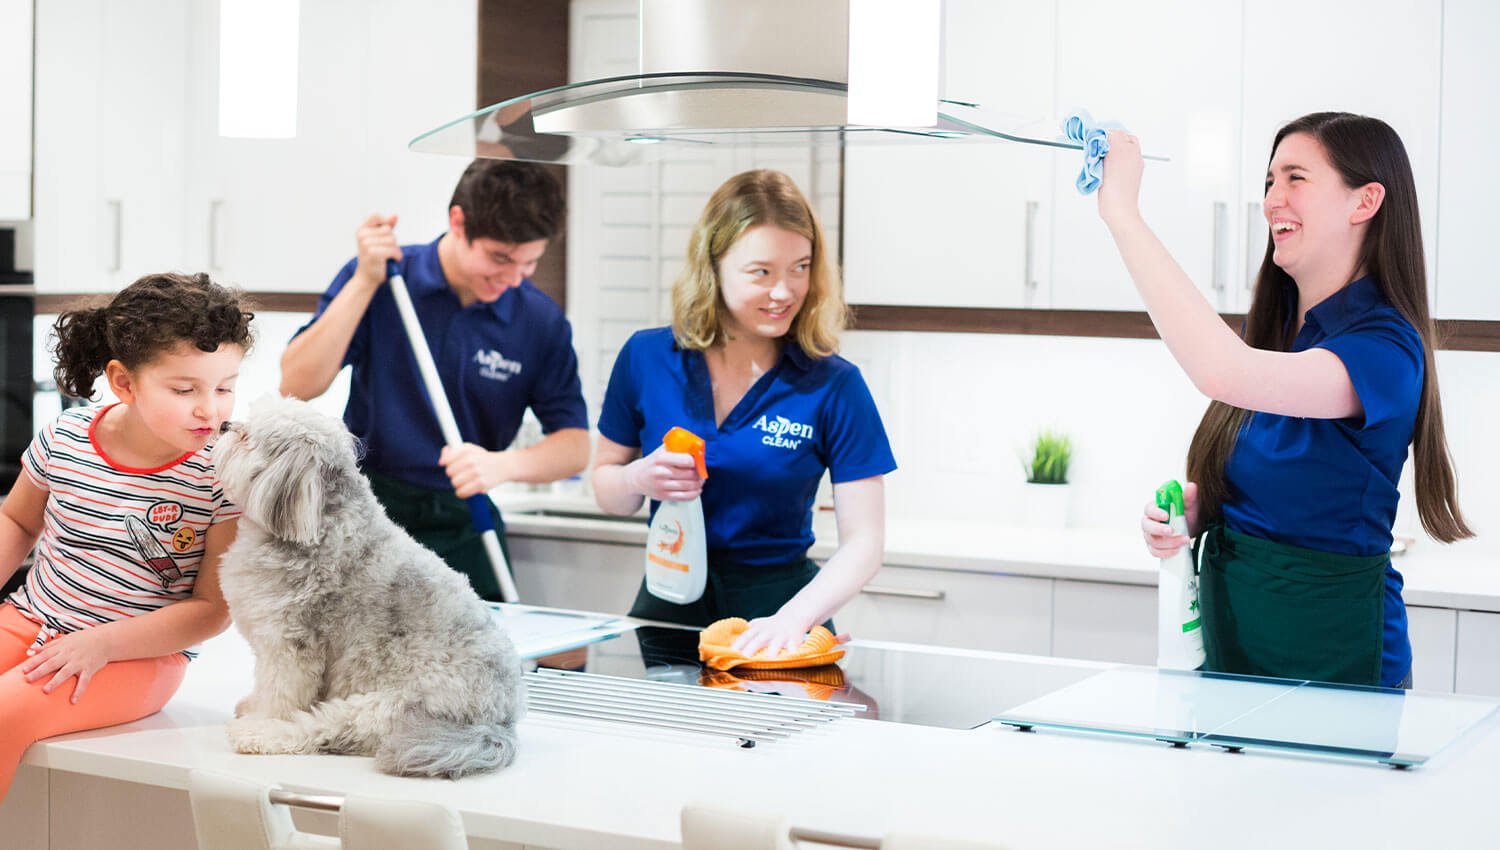 Cleaning Services Edmonton